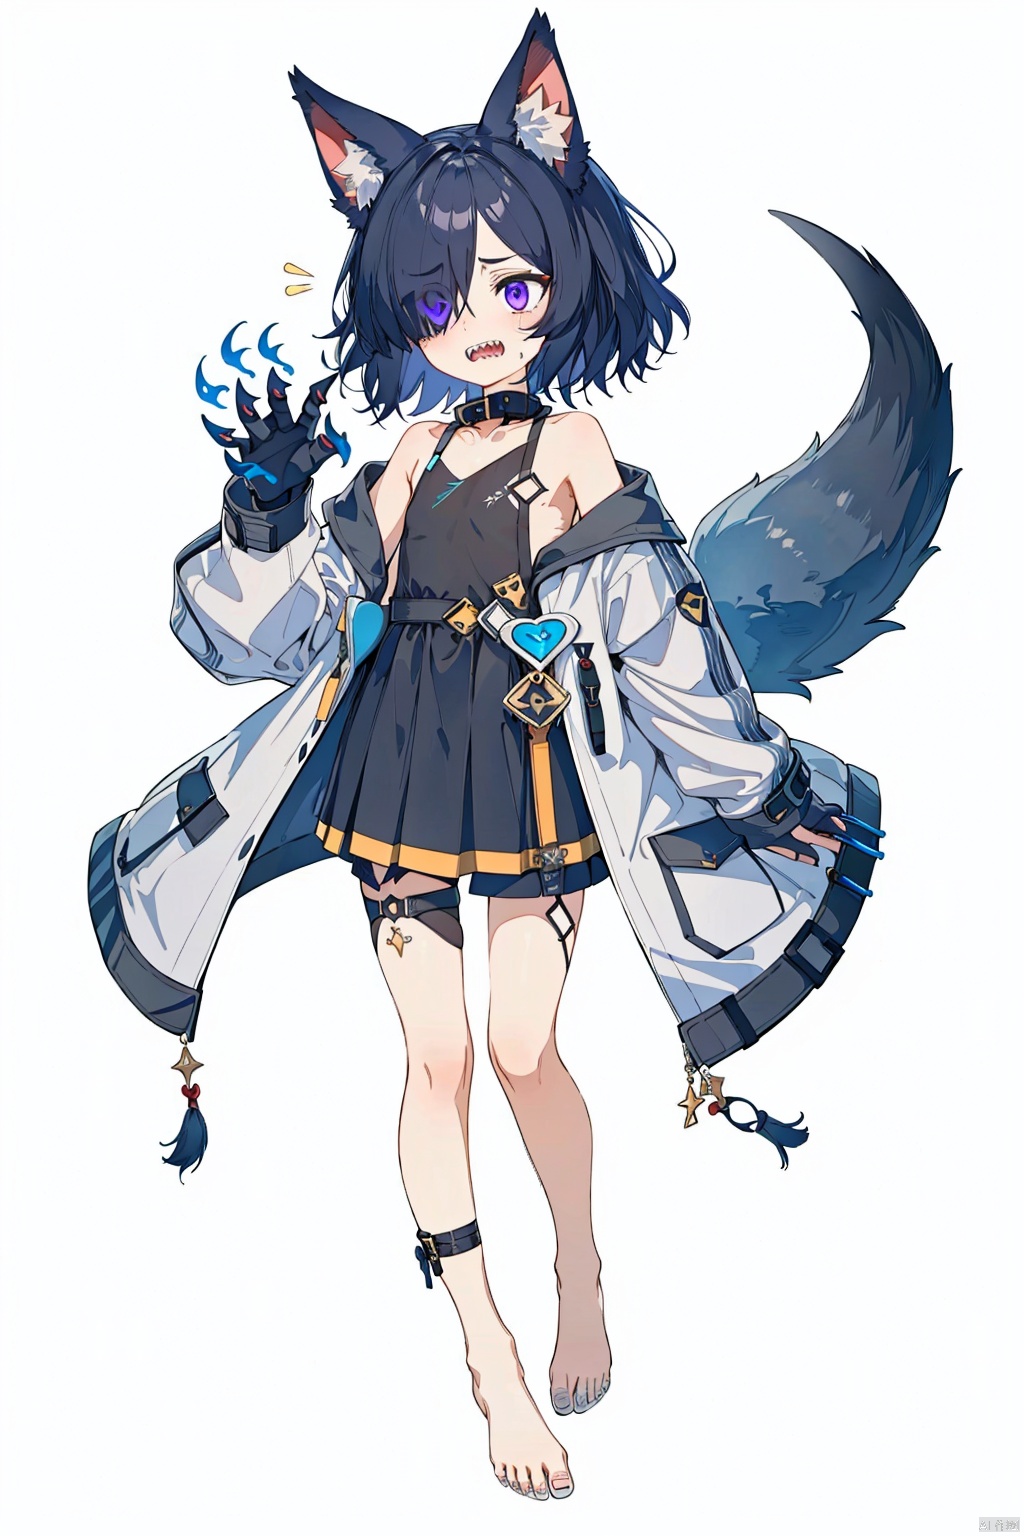  High quality, masterpiece, original, full body, character design,Pure white background,
Solo, wolf ear fluff, wolf ear, Medium hair, hair over one eye, Dark Black_hair, Messy hair, Swept bands, hair over one eye, Asymmetric bands, big eyes, purple eyes, powder blusher, flat chest, small stature, Clawed hand, delicate claws, sharp teeth, ferocity, anger,
Grey blue half open trench coat, hoodie, fingerless gloves, white collarless dress short skirt, Off shoulder, collar, bare feet, bare legs,
Giant claw marks, injured,